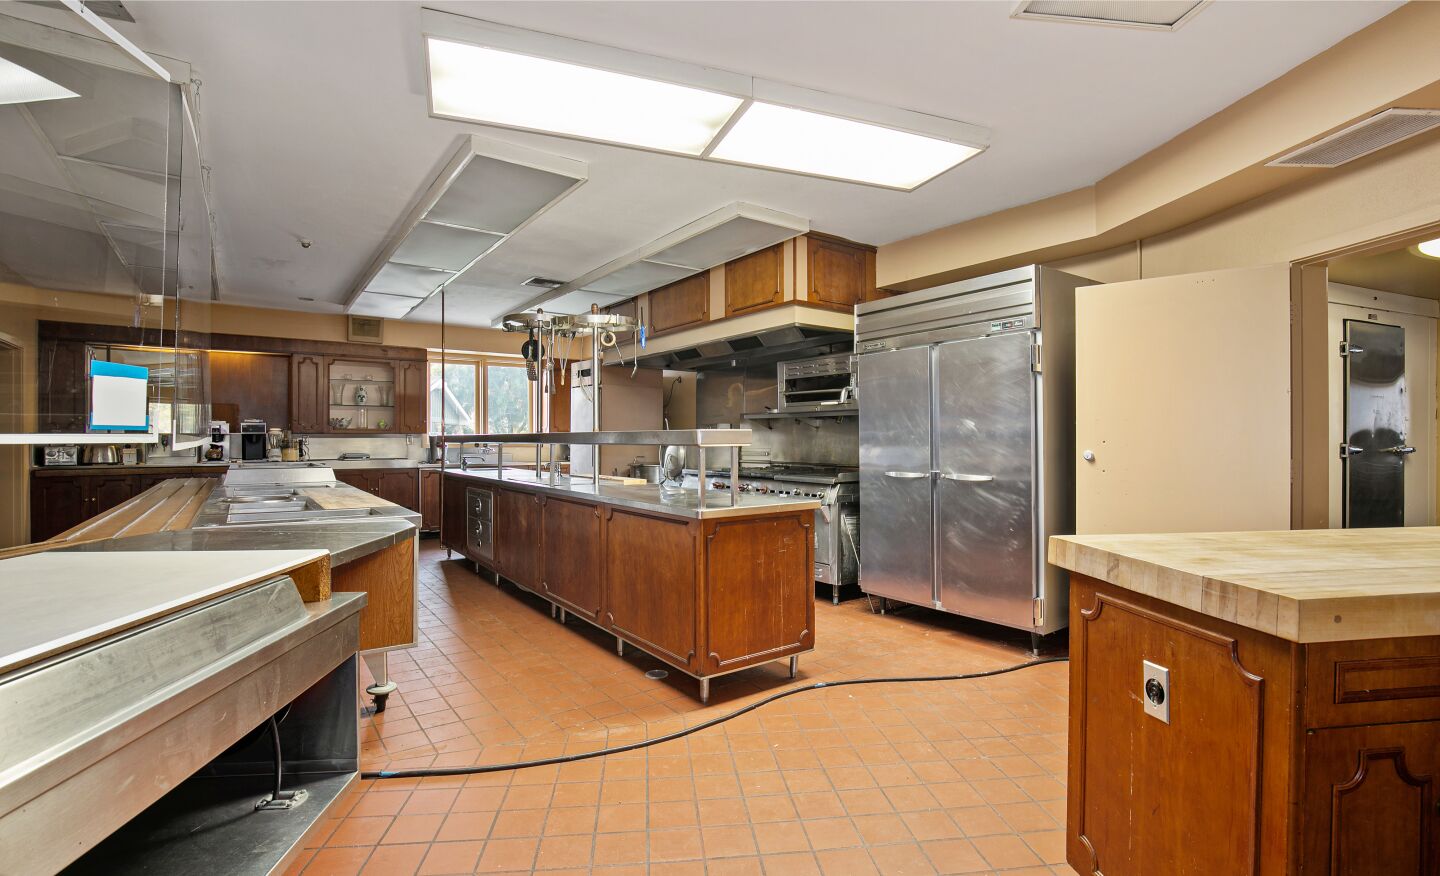 The commercial kitchen.